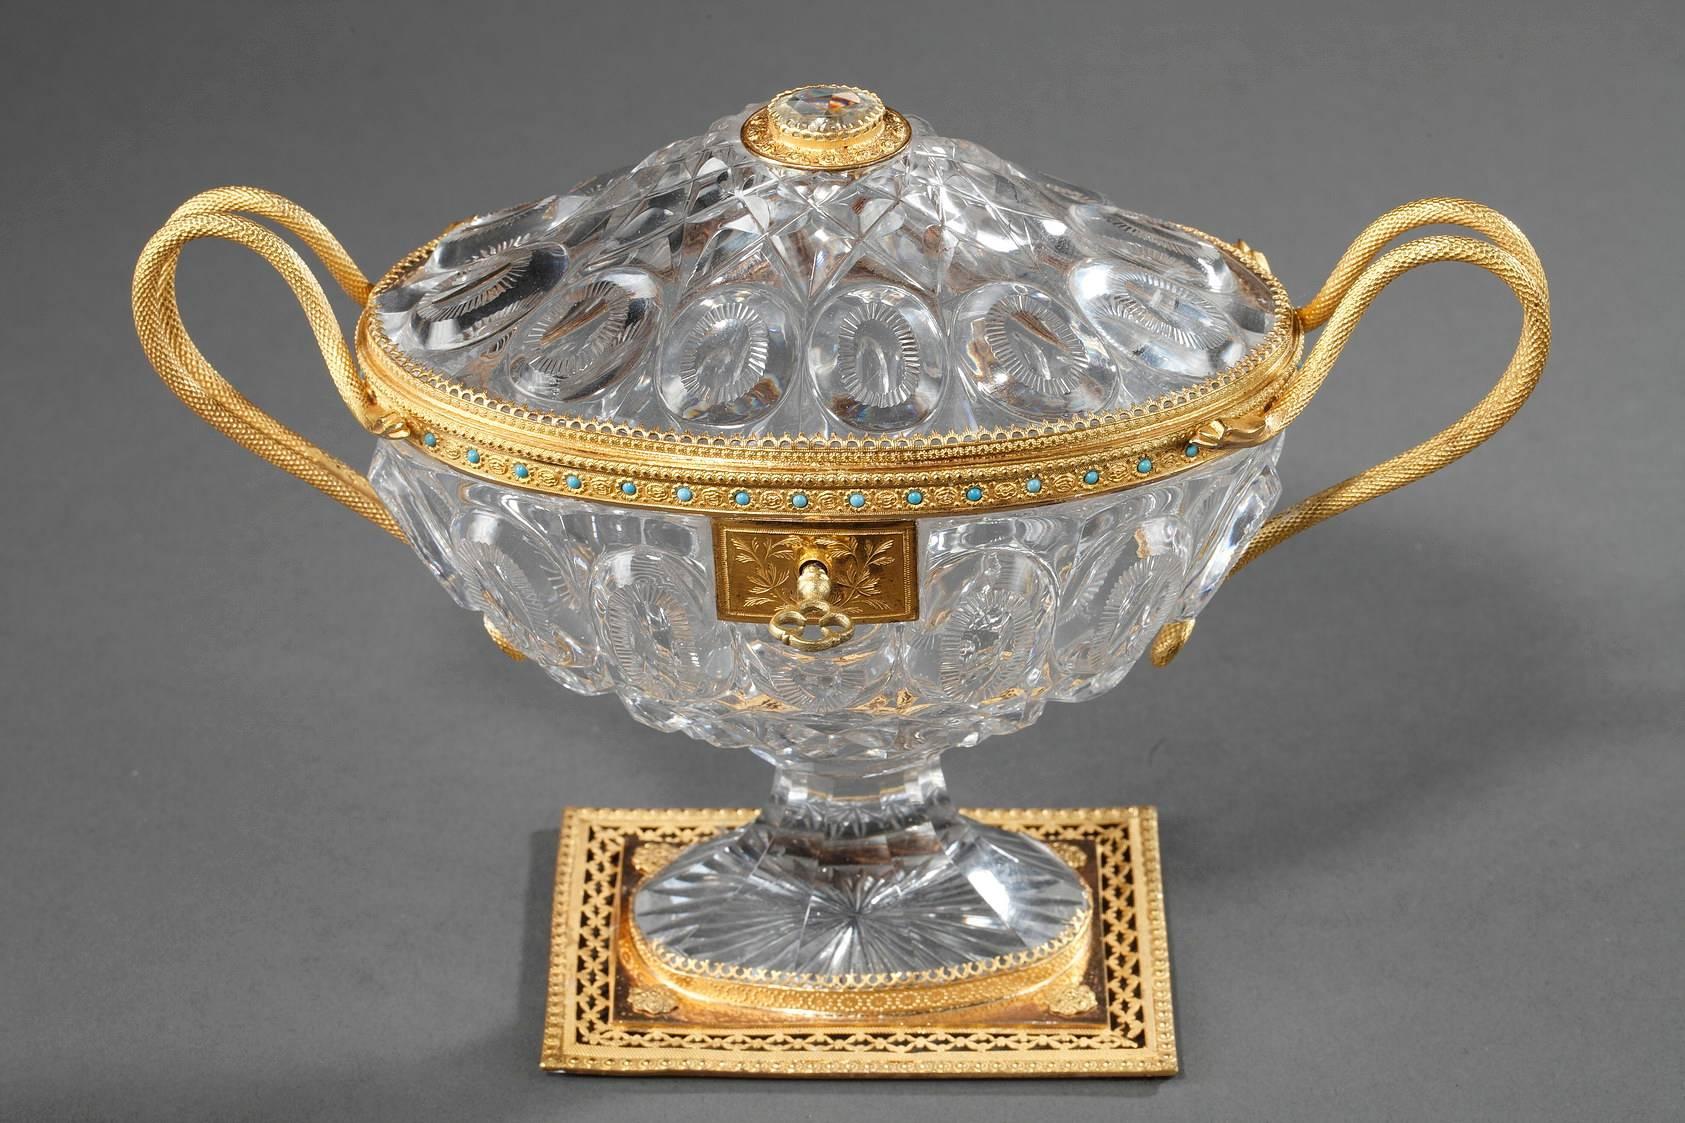 Cut-crystal cup engraved with ovals and diamond patterns. The elegant handles are in the shape of snakes, a typical motif of the Charles X period. The gilded brass frame is very elaborately sculpted with flowers, blue enamel inlays, and an openwork